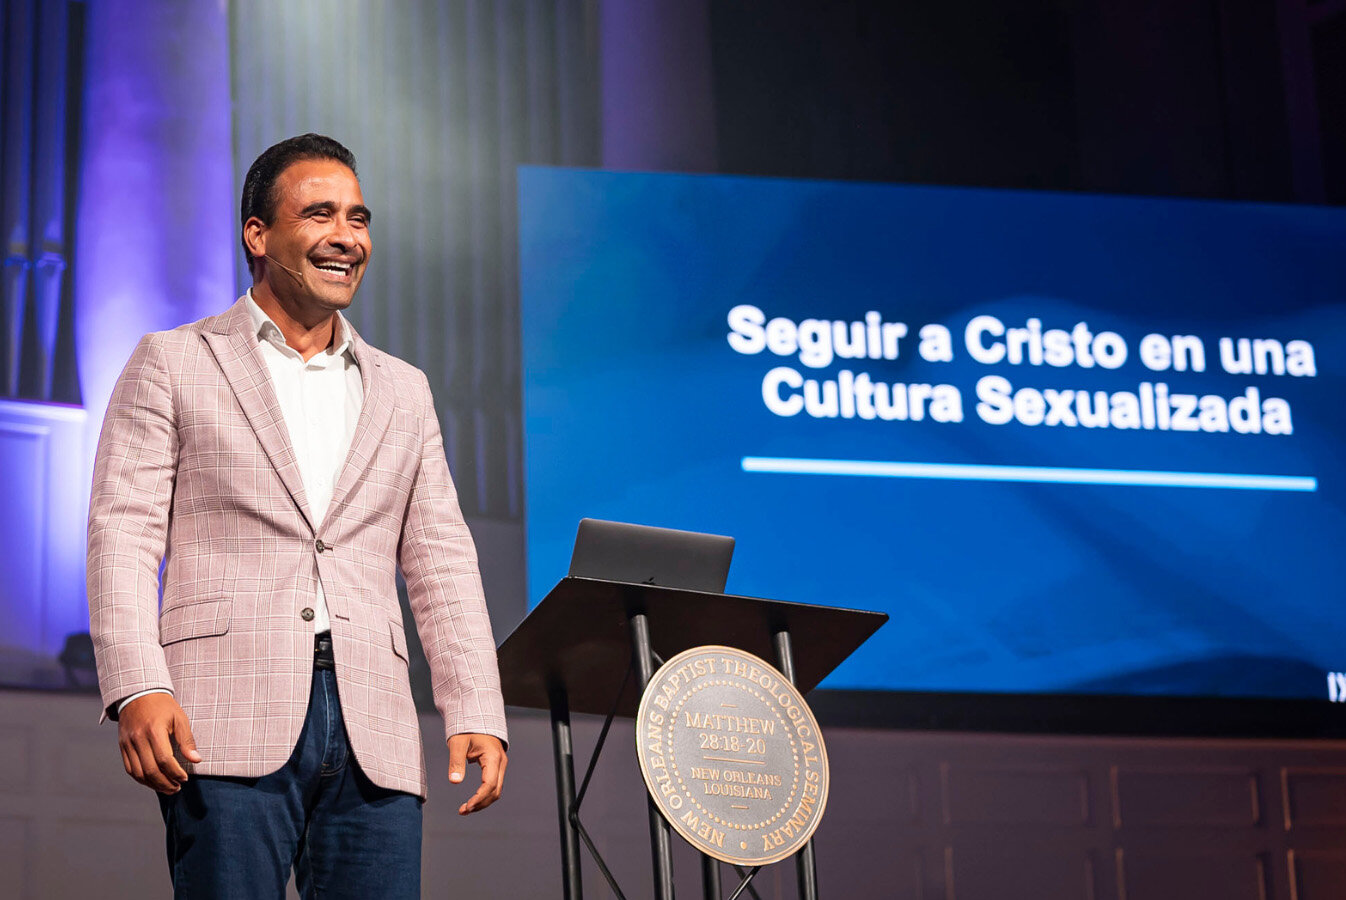 Julio Arriola, director of Send Network for the Southern Baptist of Texas Convention, speaks at the “Abre Mis Ojos” conference at New Orleans Baptist Theological Seminary. (Photo/New Orleans Baptist Theological Seminary)